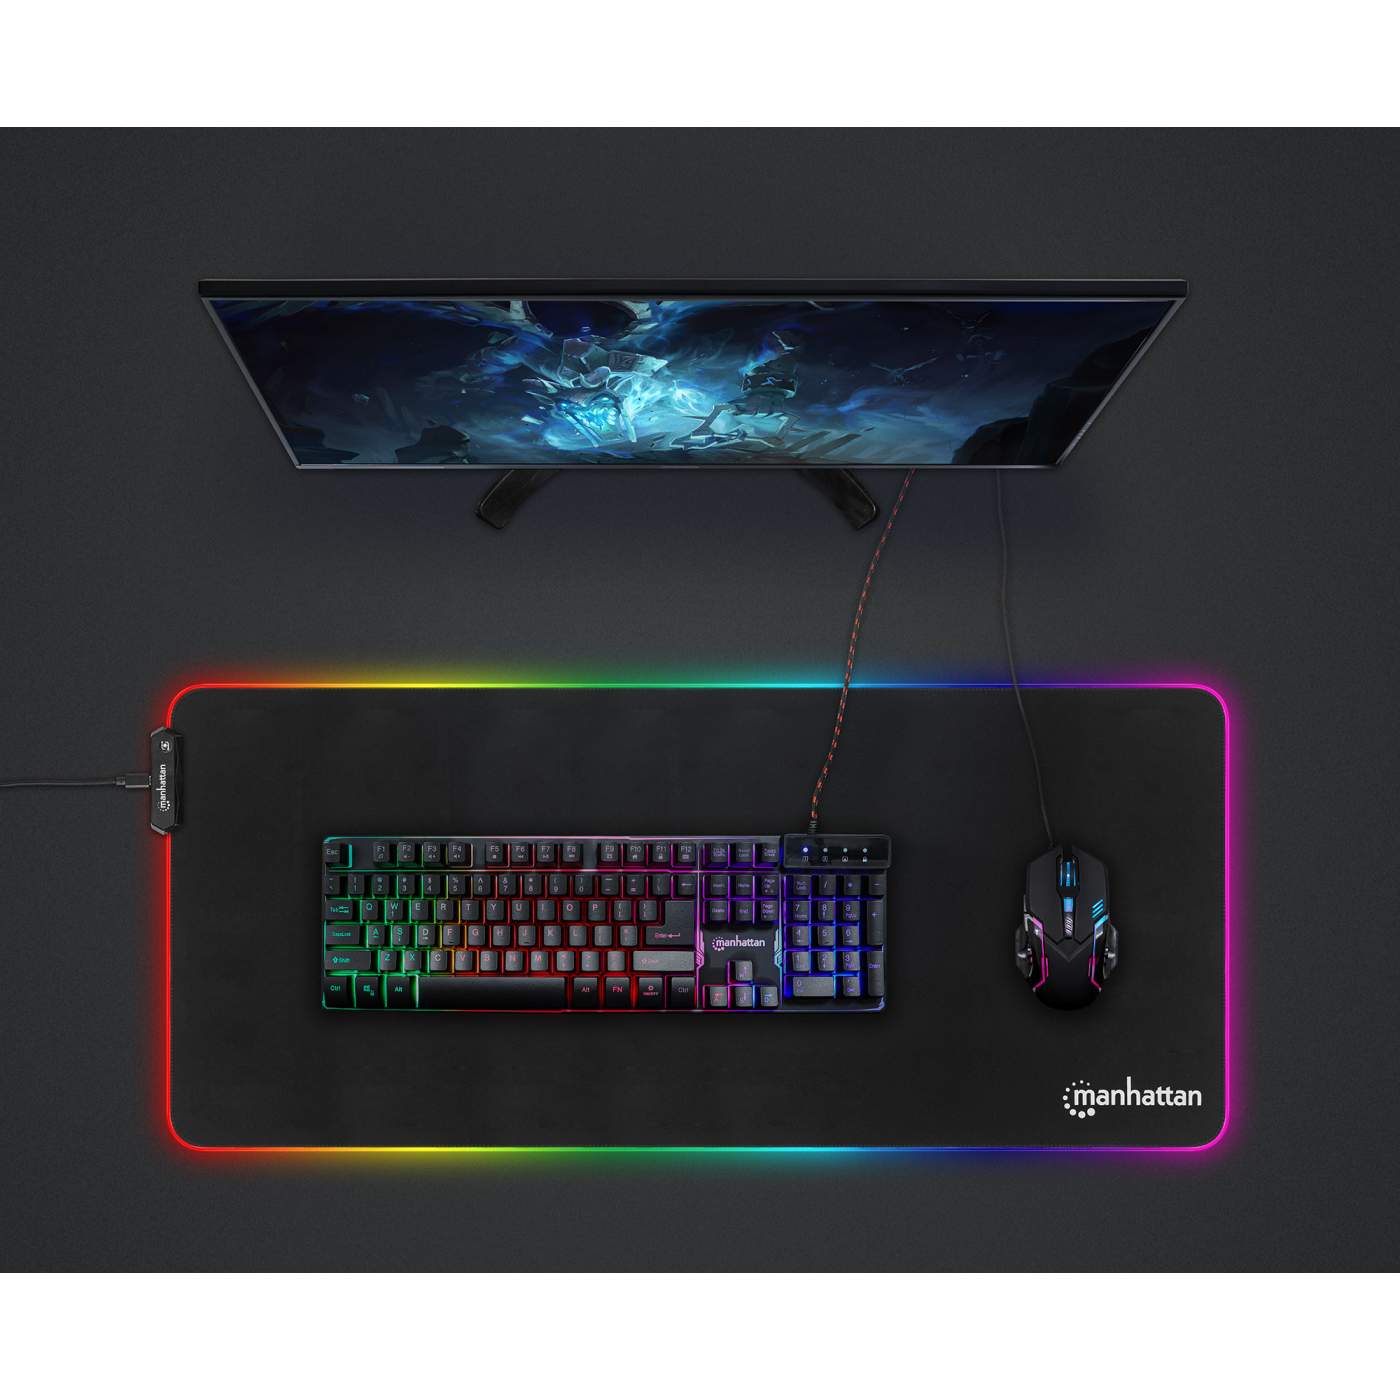 RGB Gaming Mouse Pad, TSV Large Extended Thick LED Mouse Pad Mat with 9 Lighting Modes, Anti-Slip Waterproof Oversized Computer Keyboard Desktop Pad